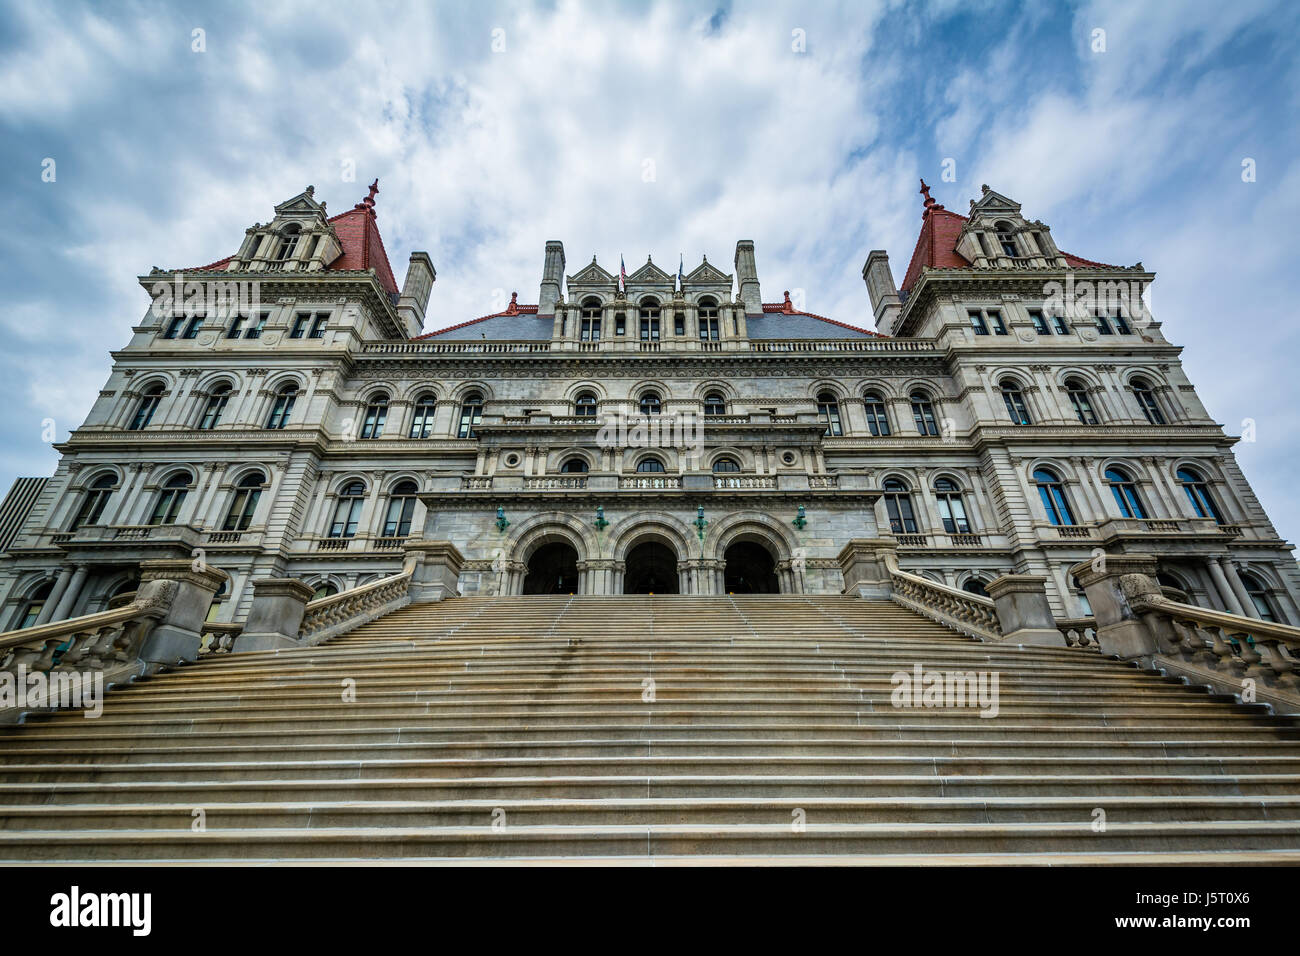 The exterior of the New York State Capitol in Albany, New York. Stock Photo